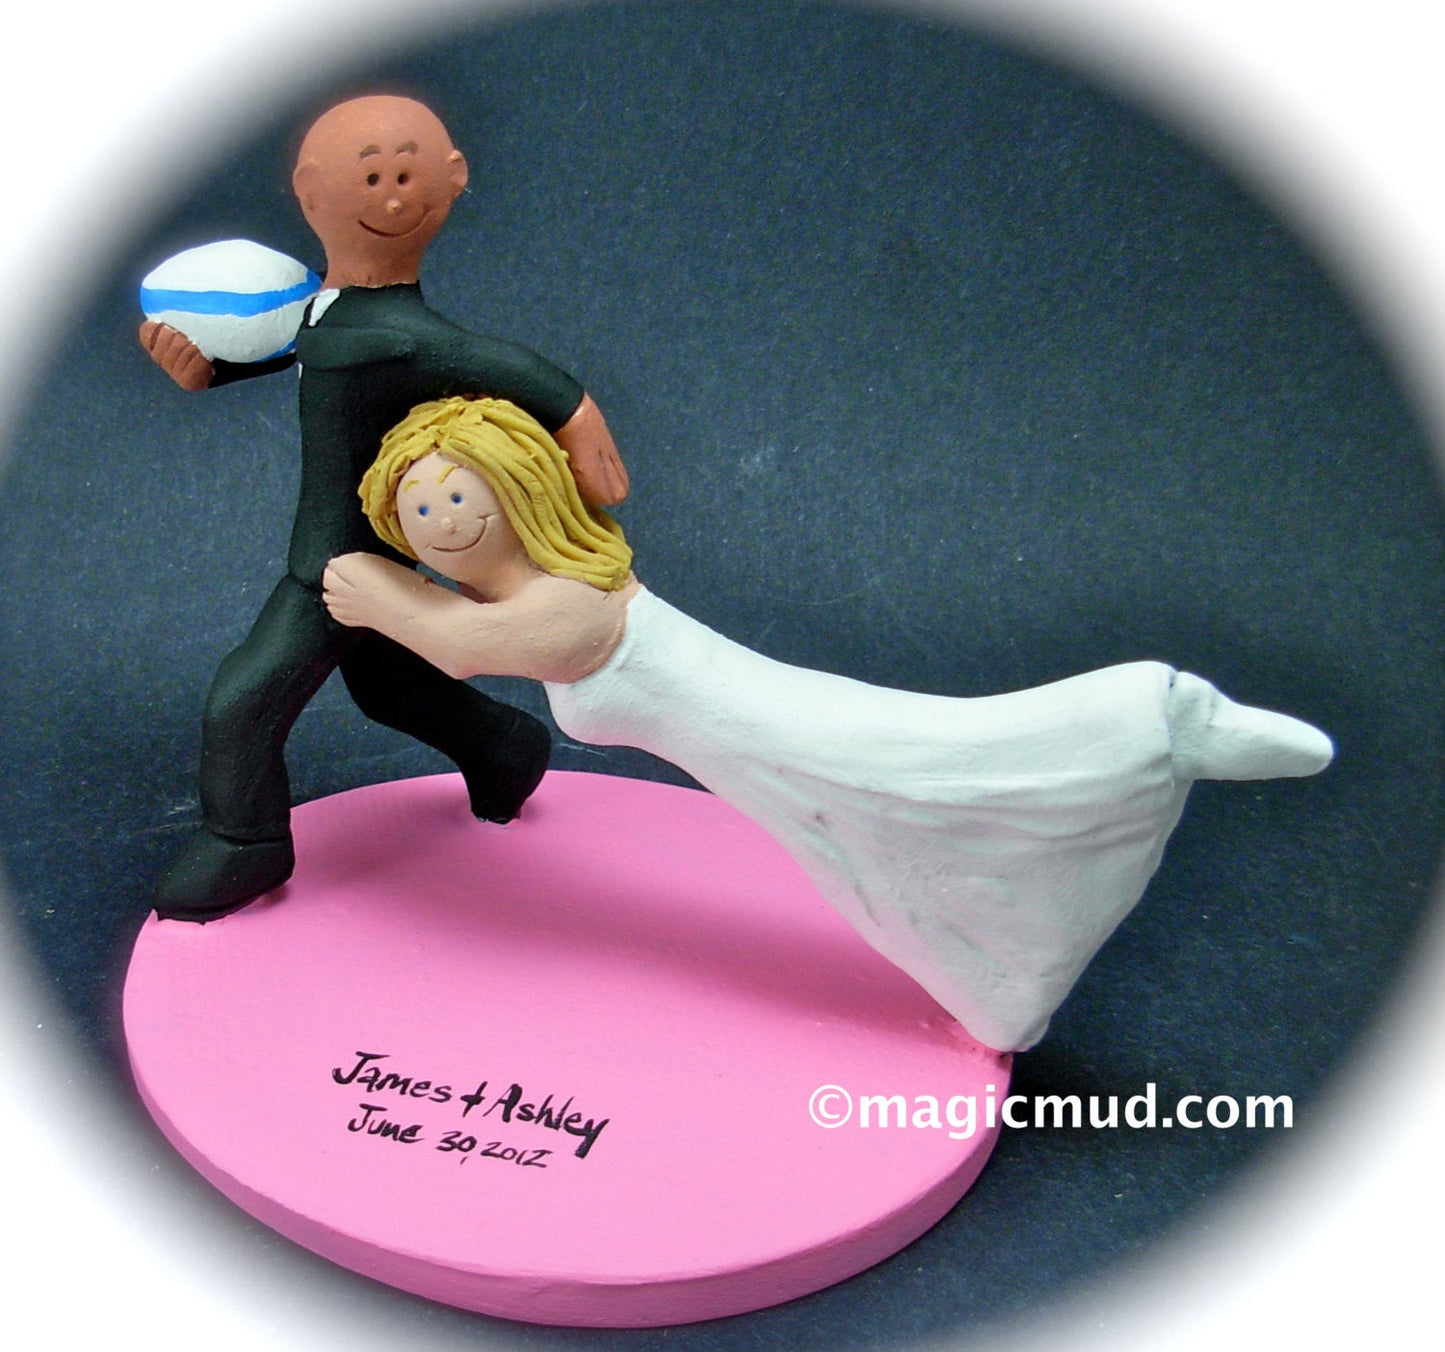 Interracial Wedding Cake Topper with Caucasian Bride, Interracial Wedding CakeTopper,Mixed Race Wedding CakeTopper,BiRacial Wedding Figurine - iWeddingCakeToppers